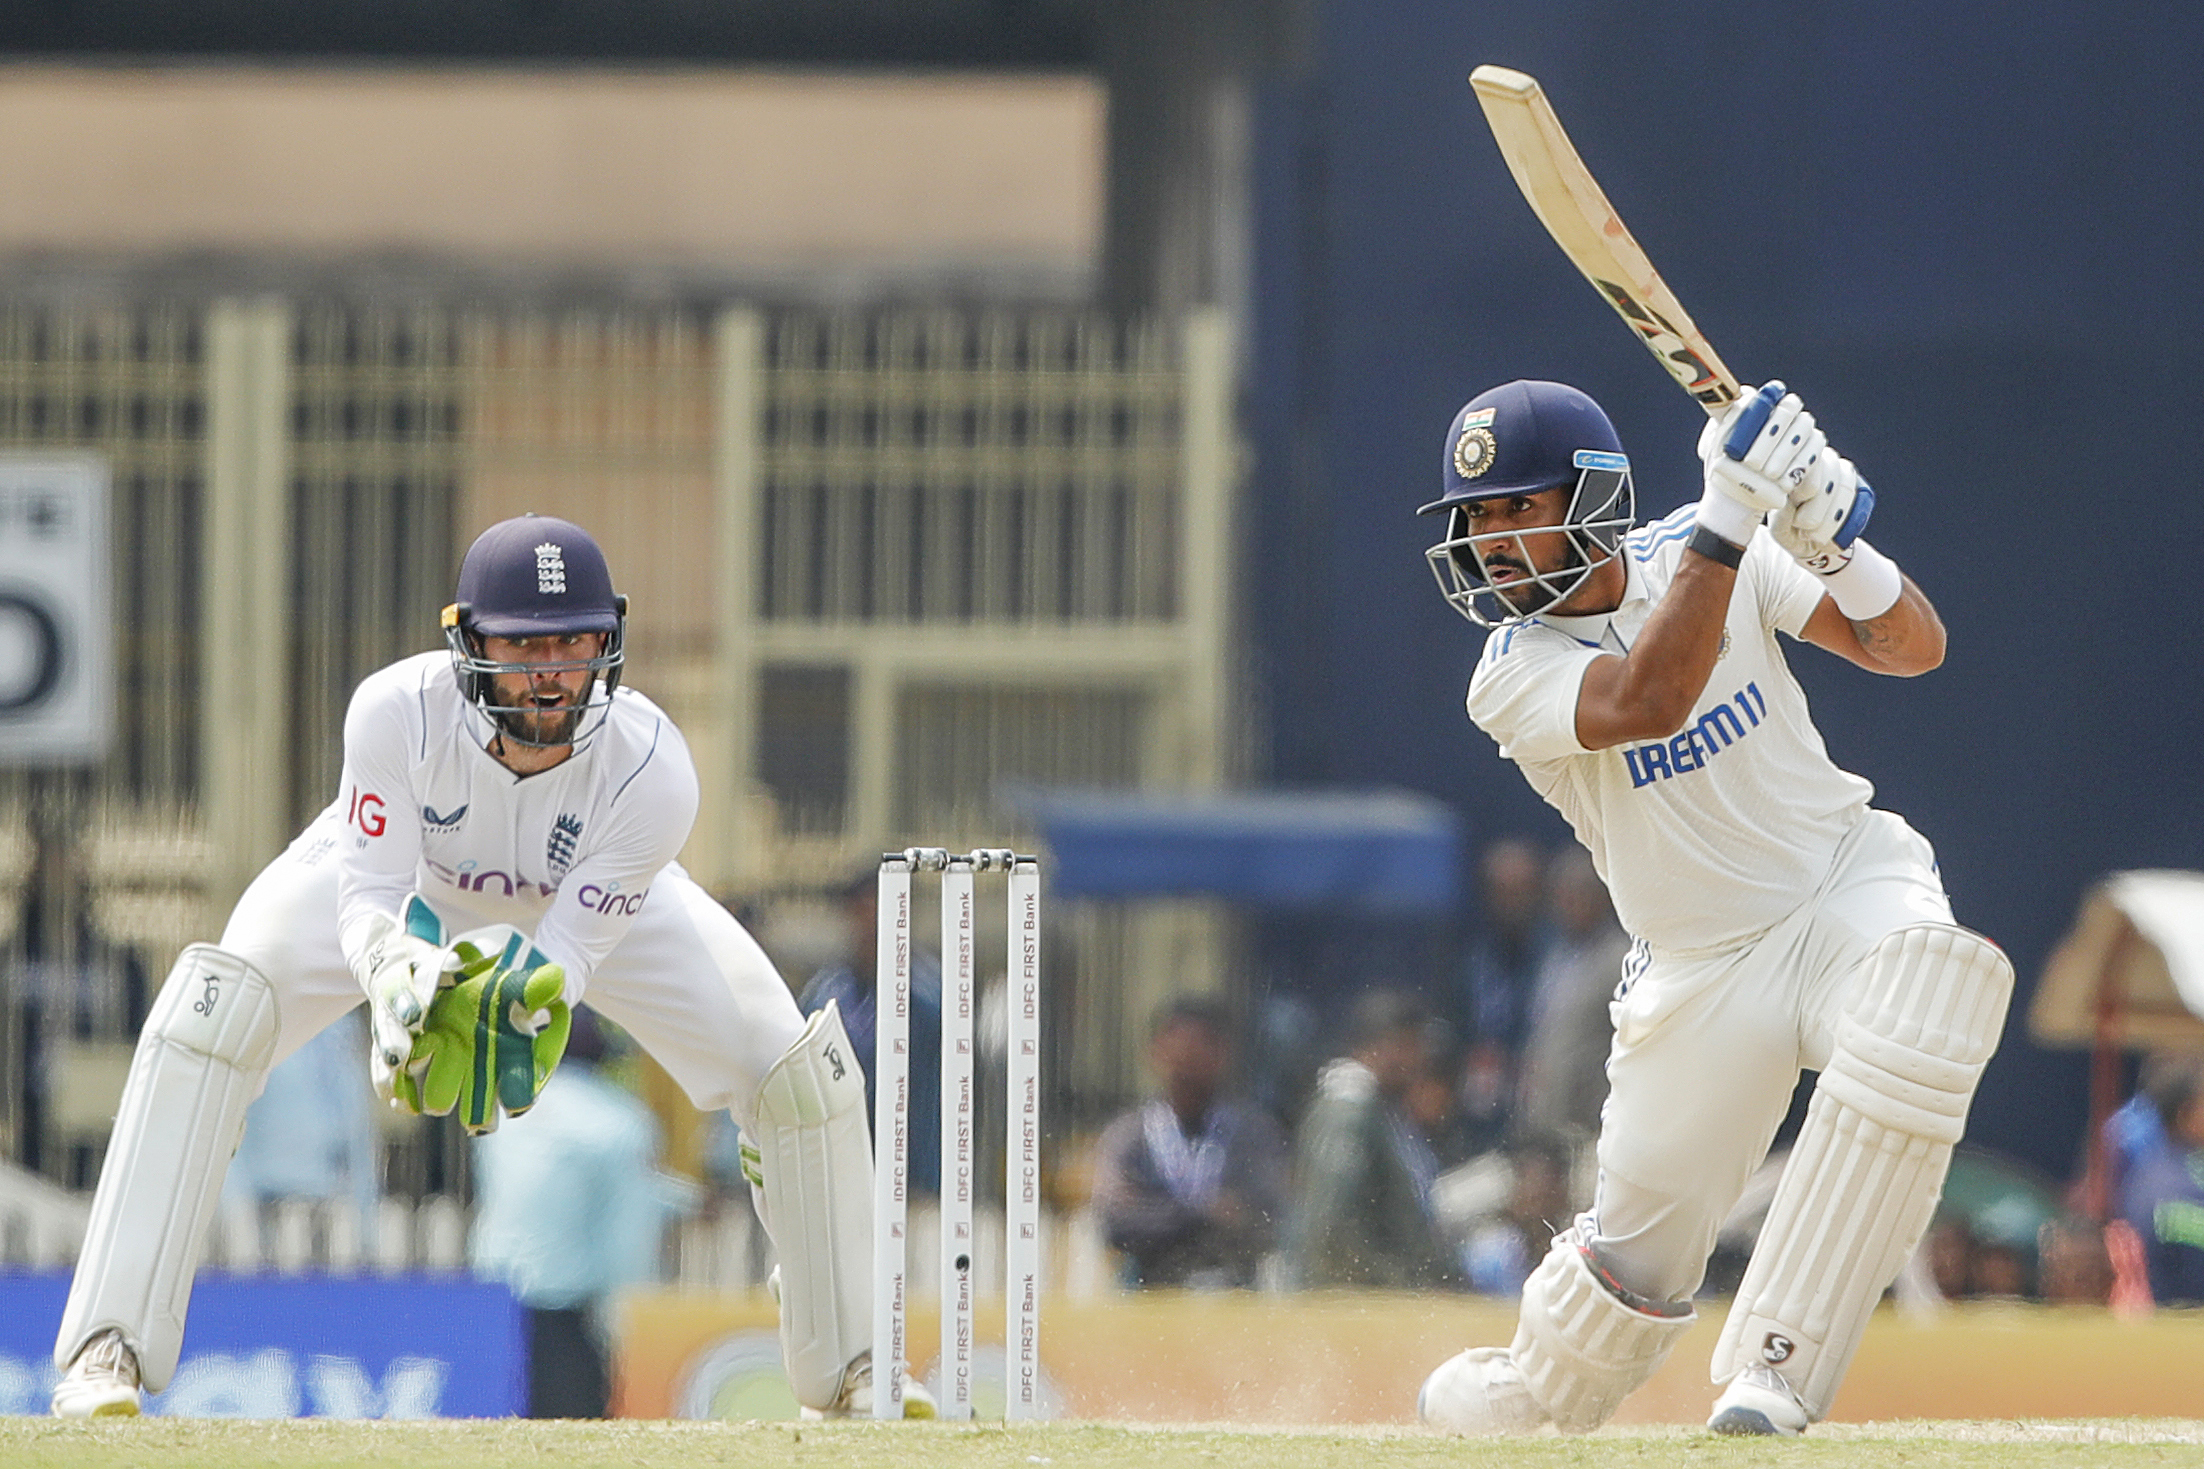 All eyes on India’s young talent in the fifth Test after hosts sweep the series 3-1